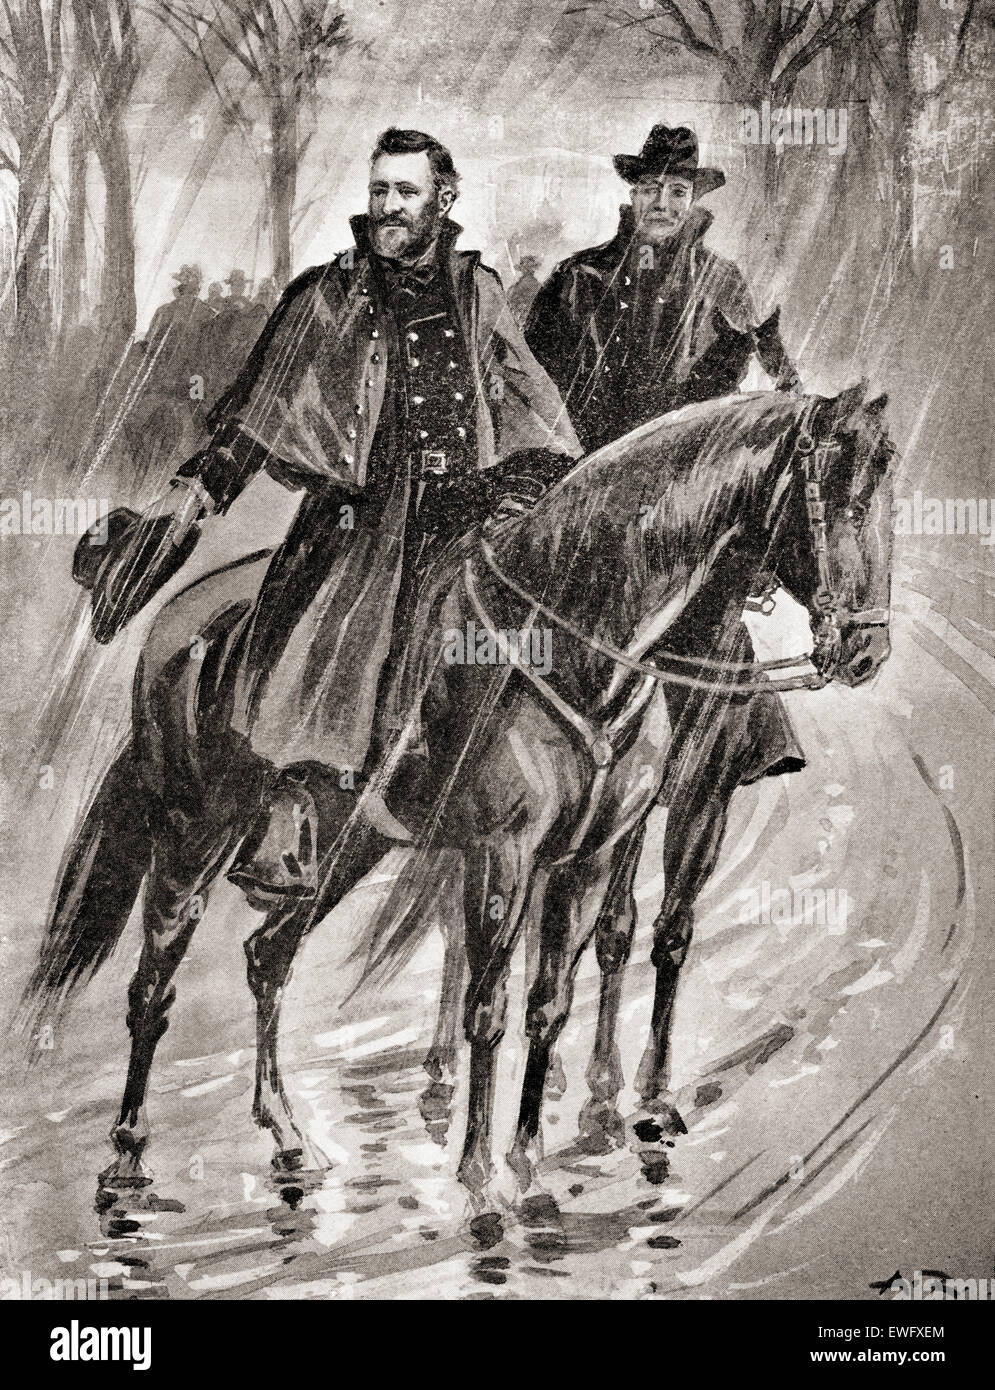 General Grant reconnoitering in the rain at Belmont, Missouri, before the battle in 1861.  Ulysses S. Grant, 1822 – 1885.   Commanding General in the Union Army during the American Civil War and 18th President of the United States. Stock Photo